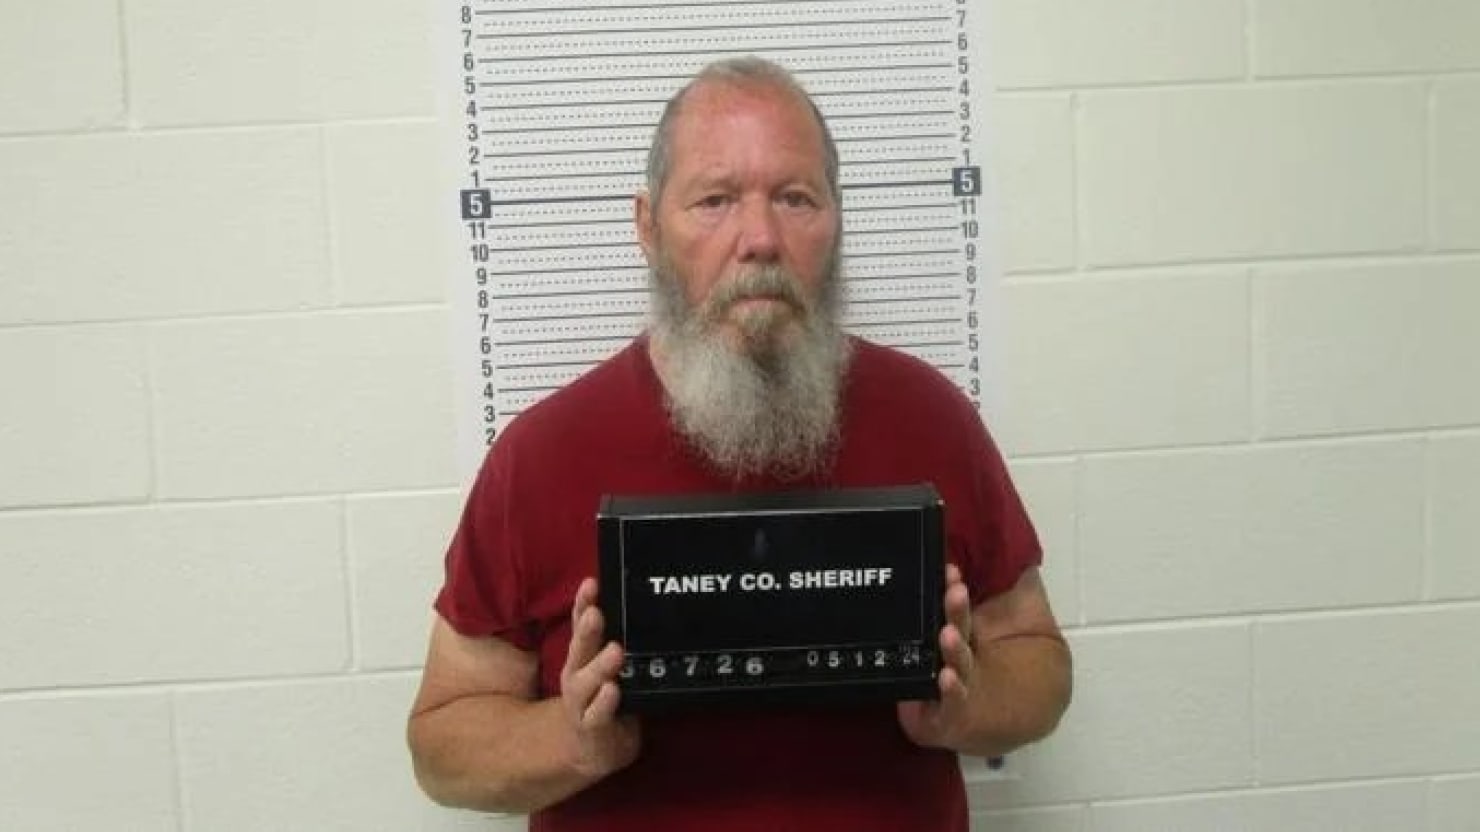 ‘Serial Child Rapist’ Nabbed in Missouri After 24 Years on the Run: Feds